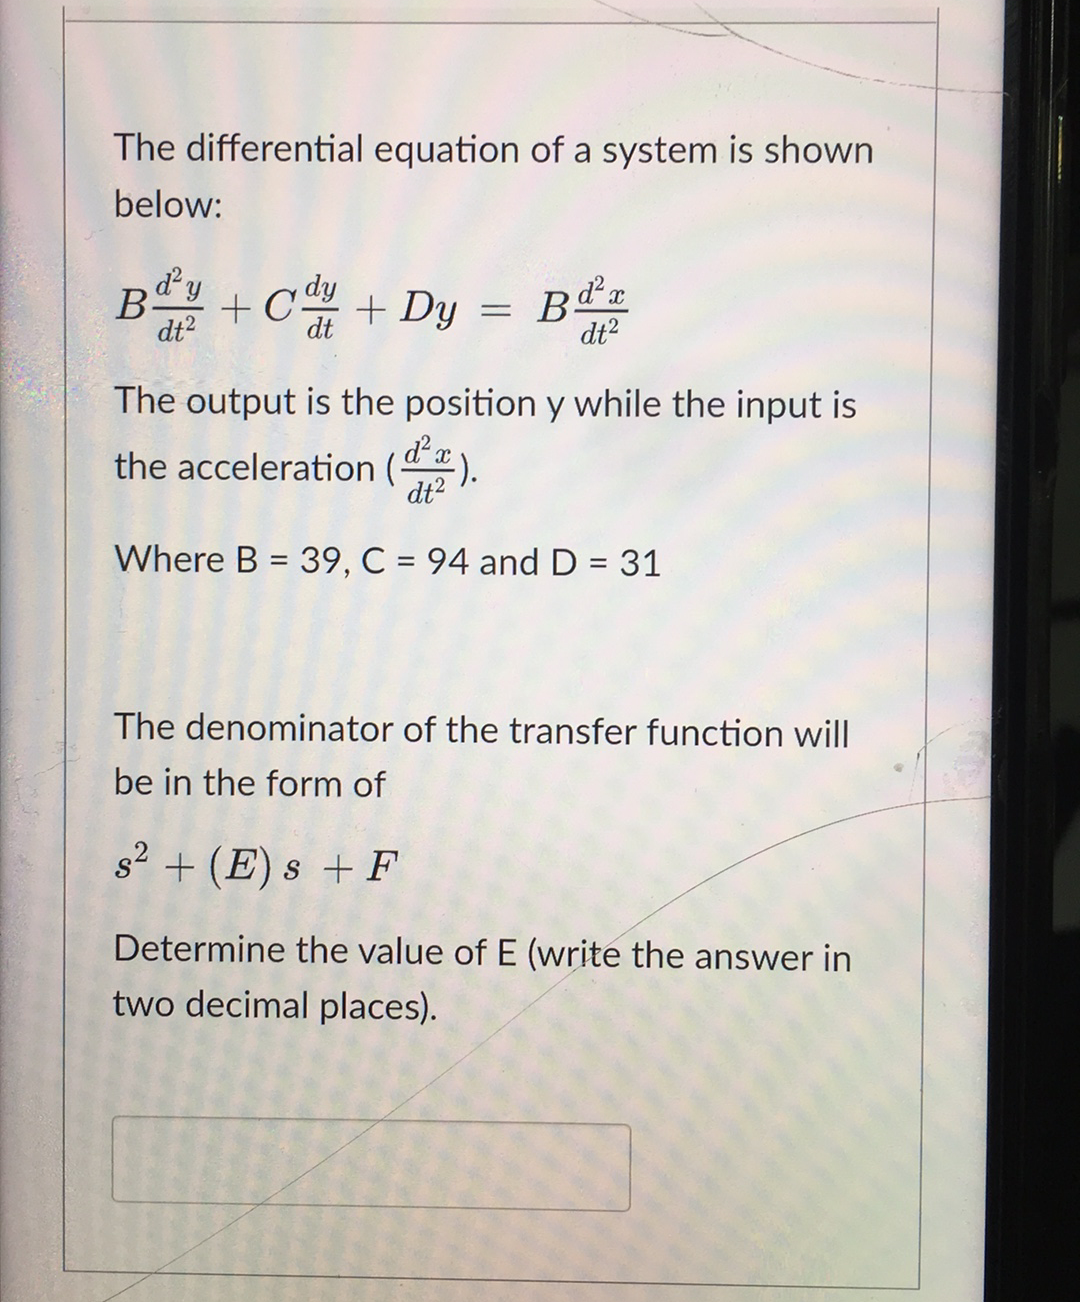 The differential equation of a system is shown
below:
By + C + Dy
dt?
dt
dt?
The output is the position y while the input is
the acceleration (a
:).
dt?
Where B = 39, C = 94 and D = 31
%3D
The denominator of the transfer function will
be in the form of
s2 + (E) s + F
Determine the value of E (write the answer in
two decimal places).
